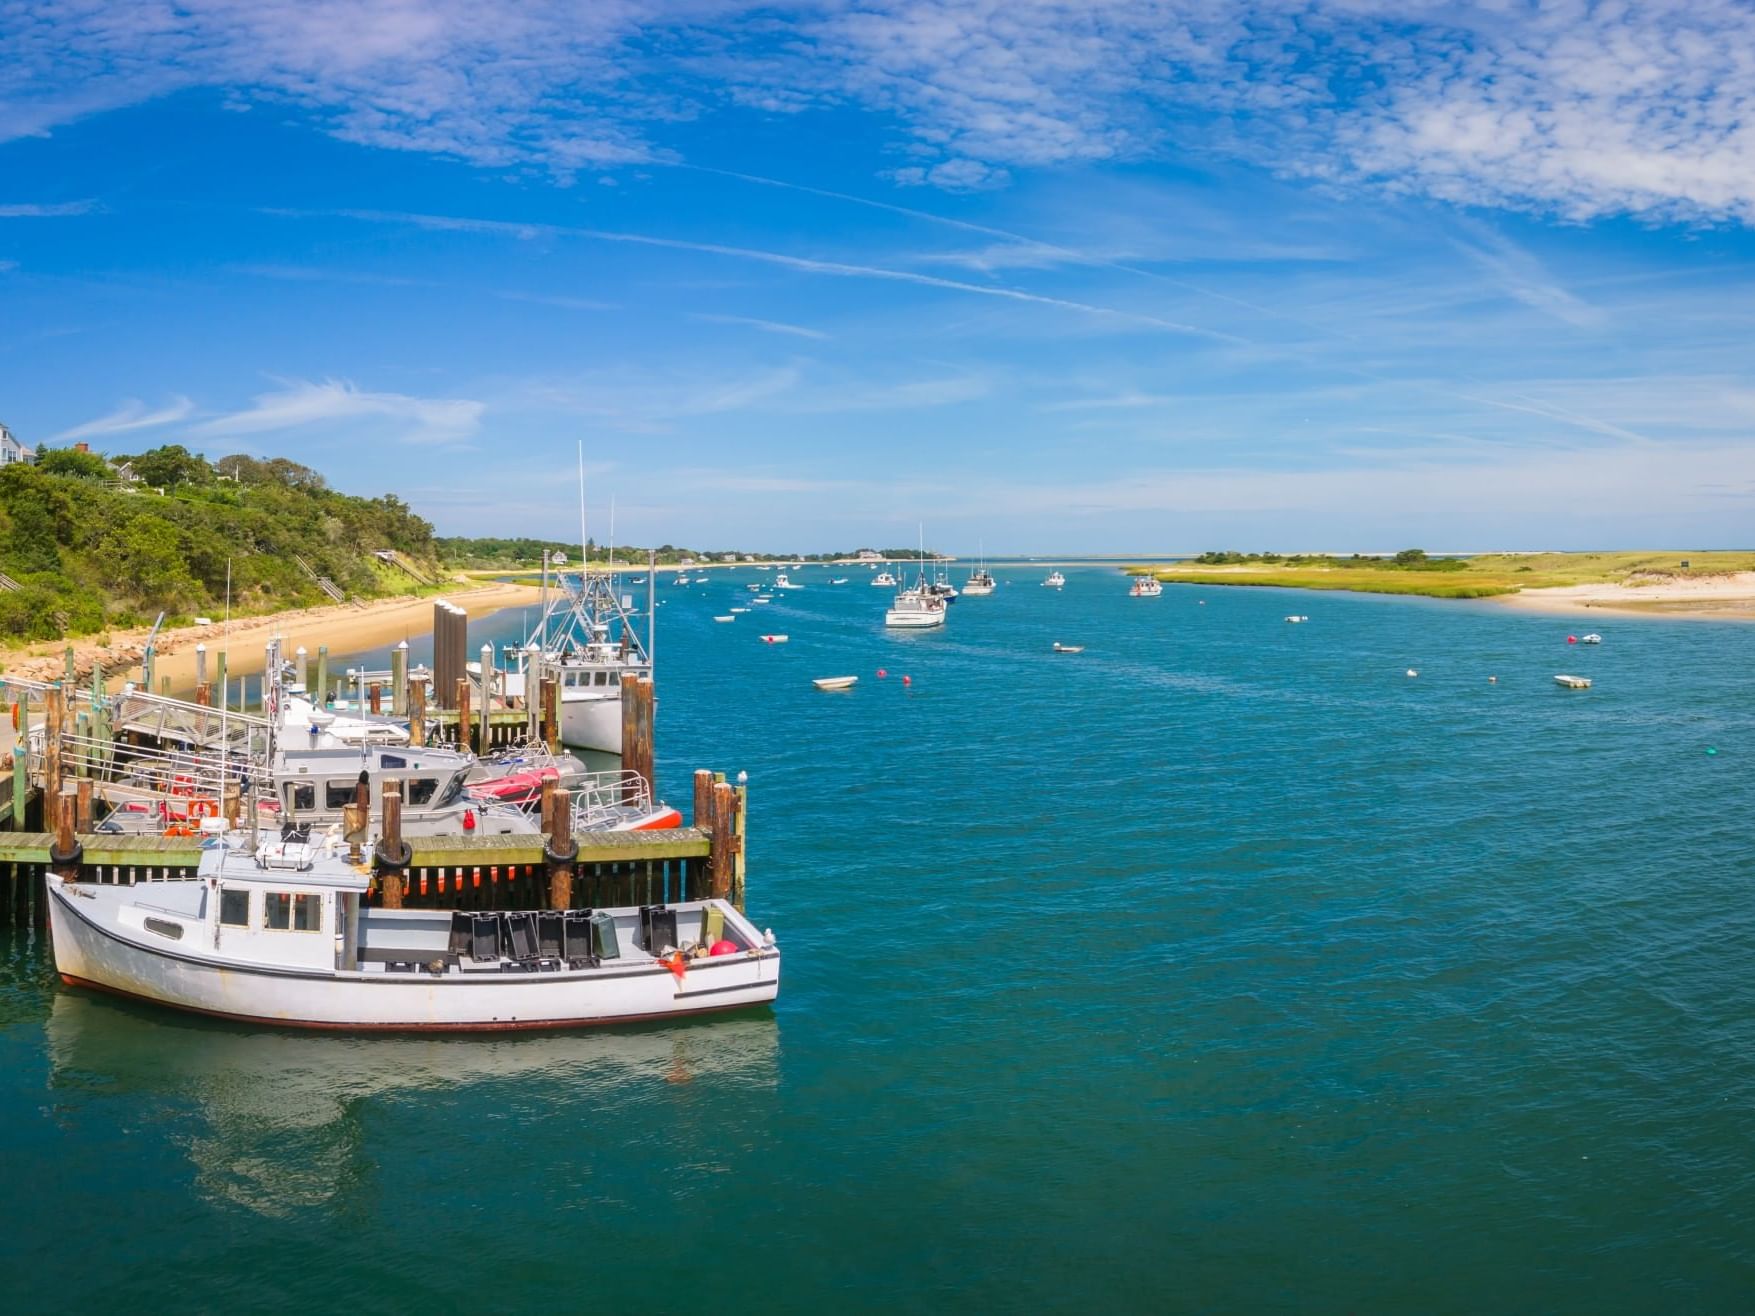 Panoramic view of boats parked by the dock in Chatham Fish Pier near Chatham Tides Resort